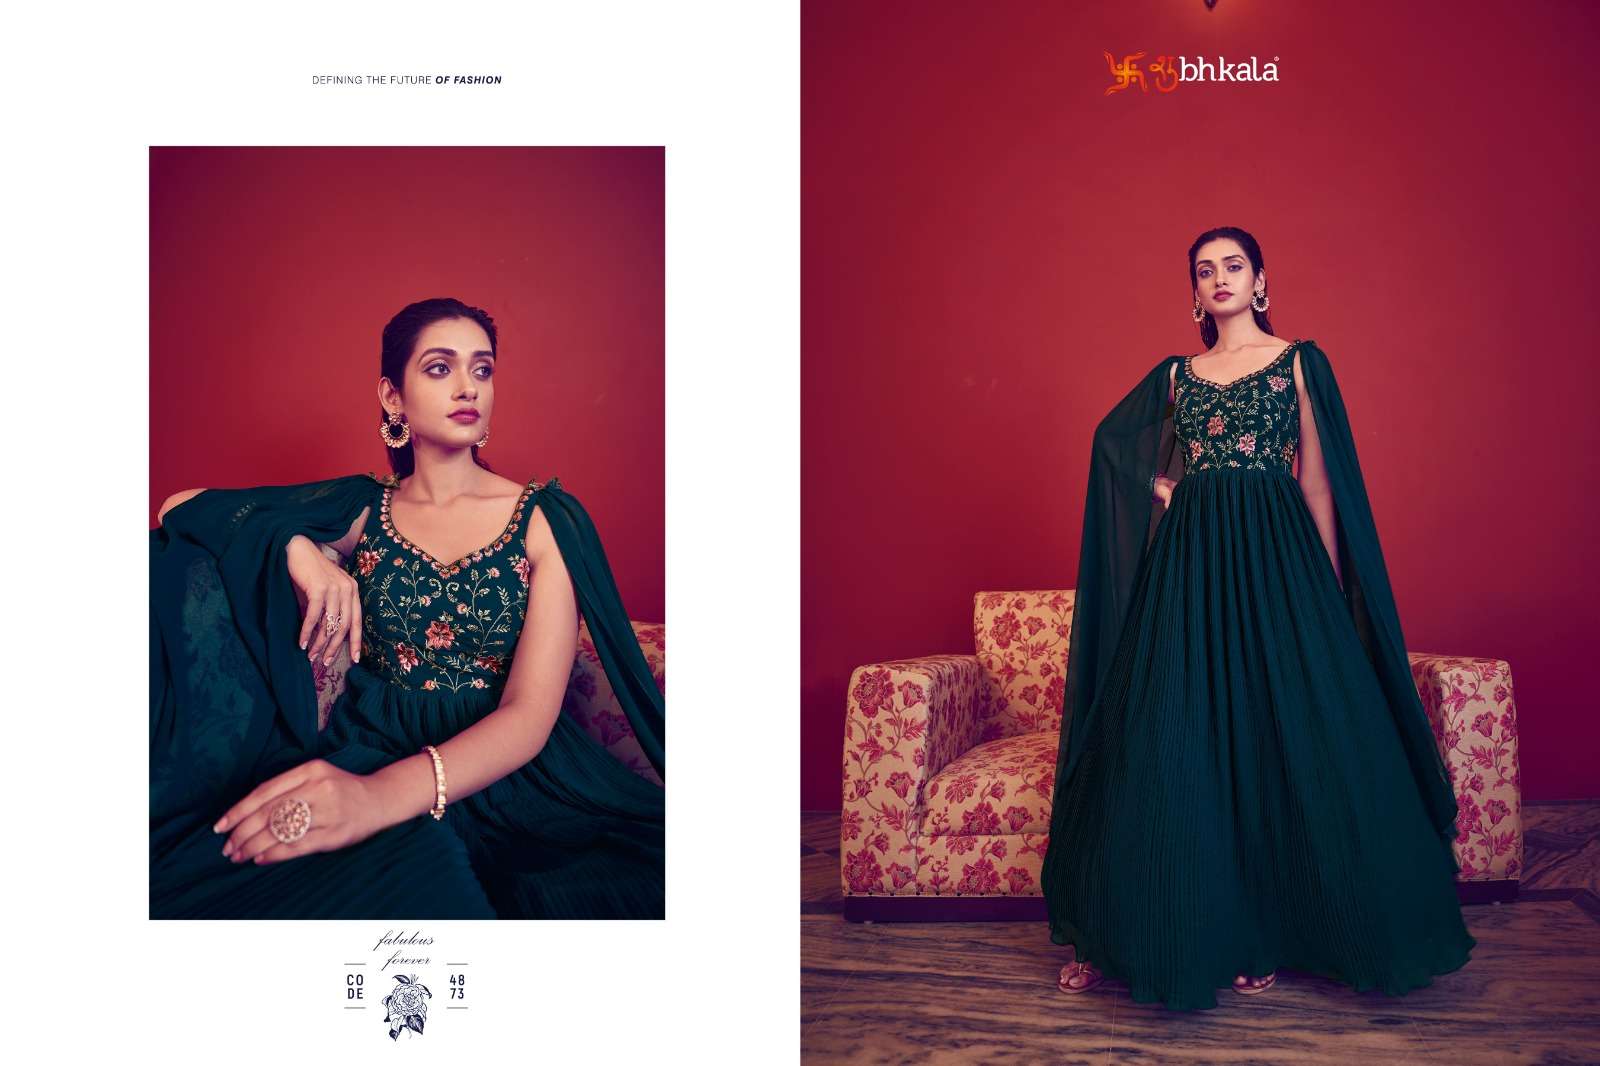 Flory Vol-41 By Shubhkala 4971 To 4975 Series Beautiful Stylish Fancy Colorful Casual Wear & Ethnic Wear Georgette Gowns With Dupatta At Wholesale Price